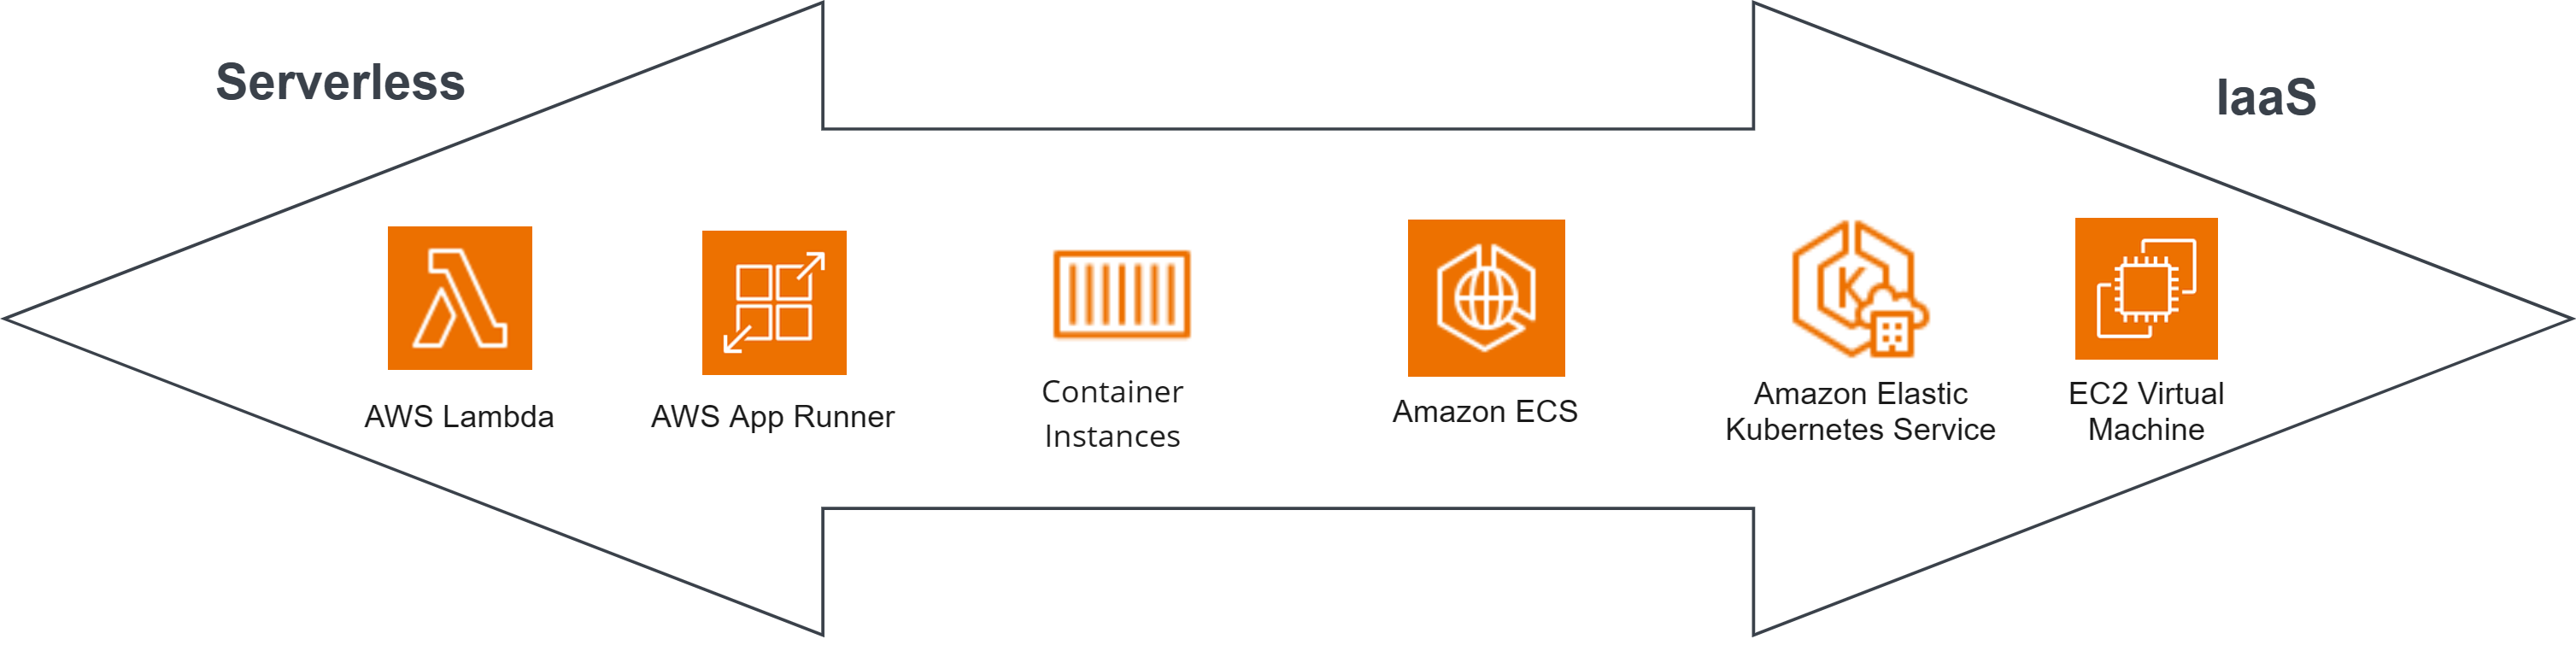 Overview of AWS Compute options for hosting the Particular Service Platform